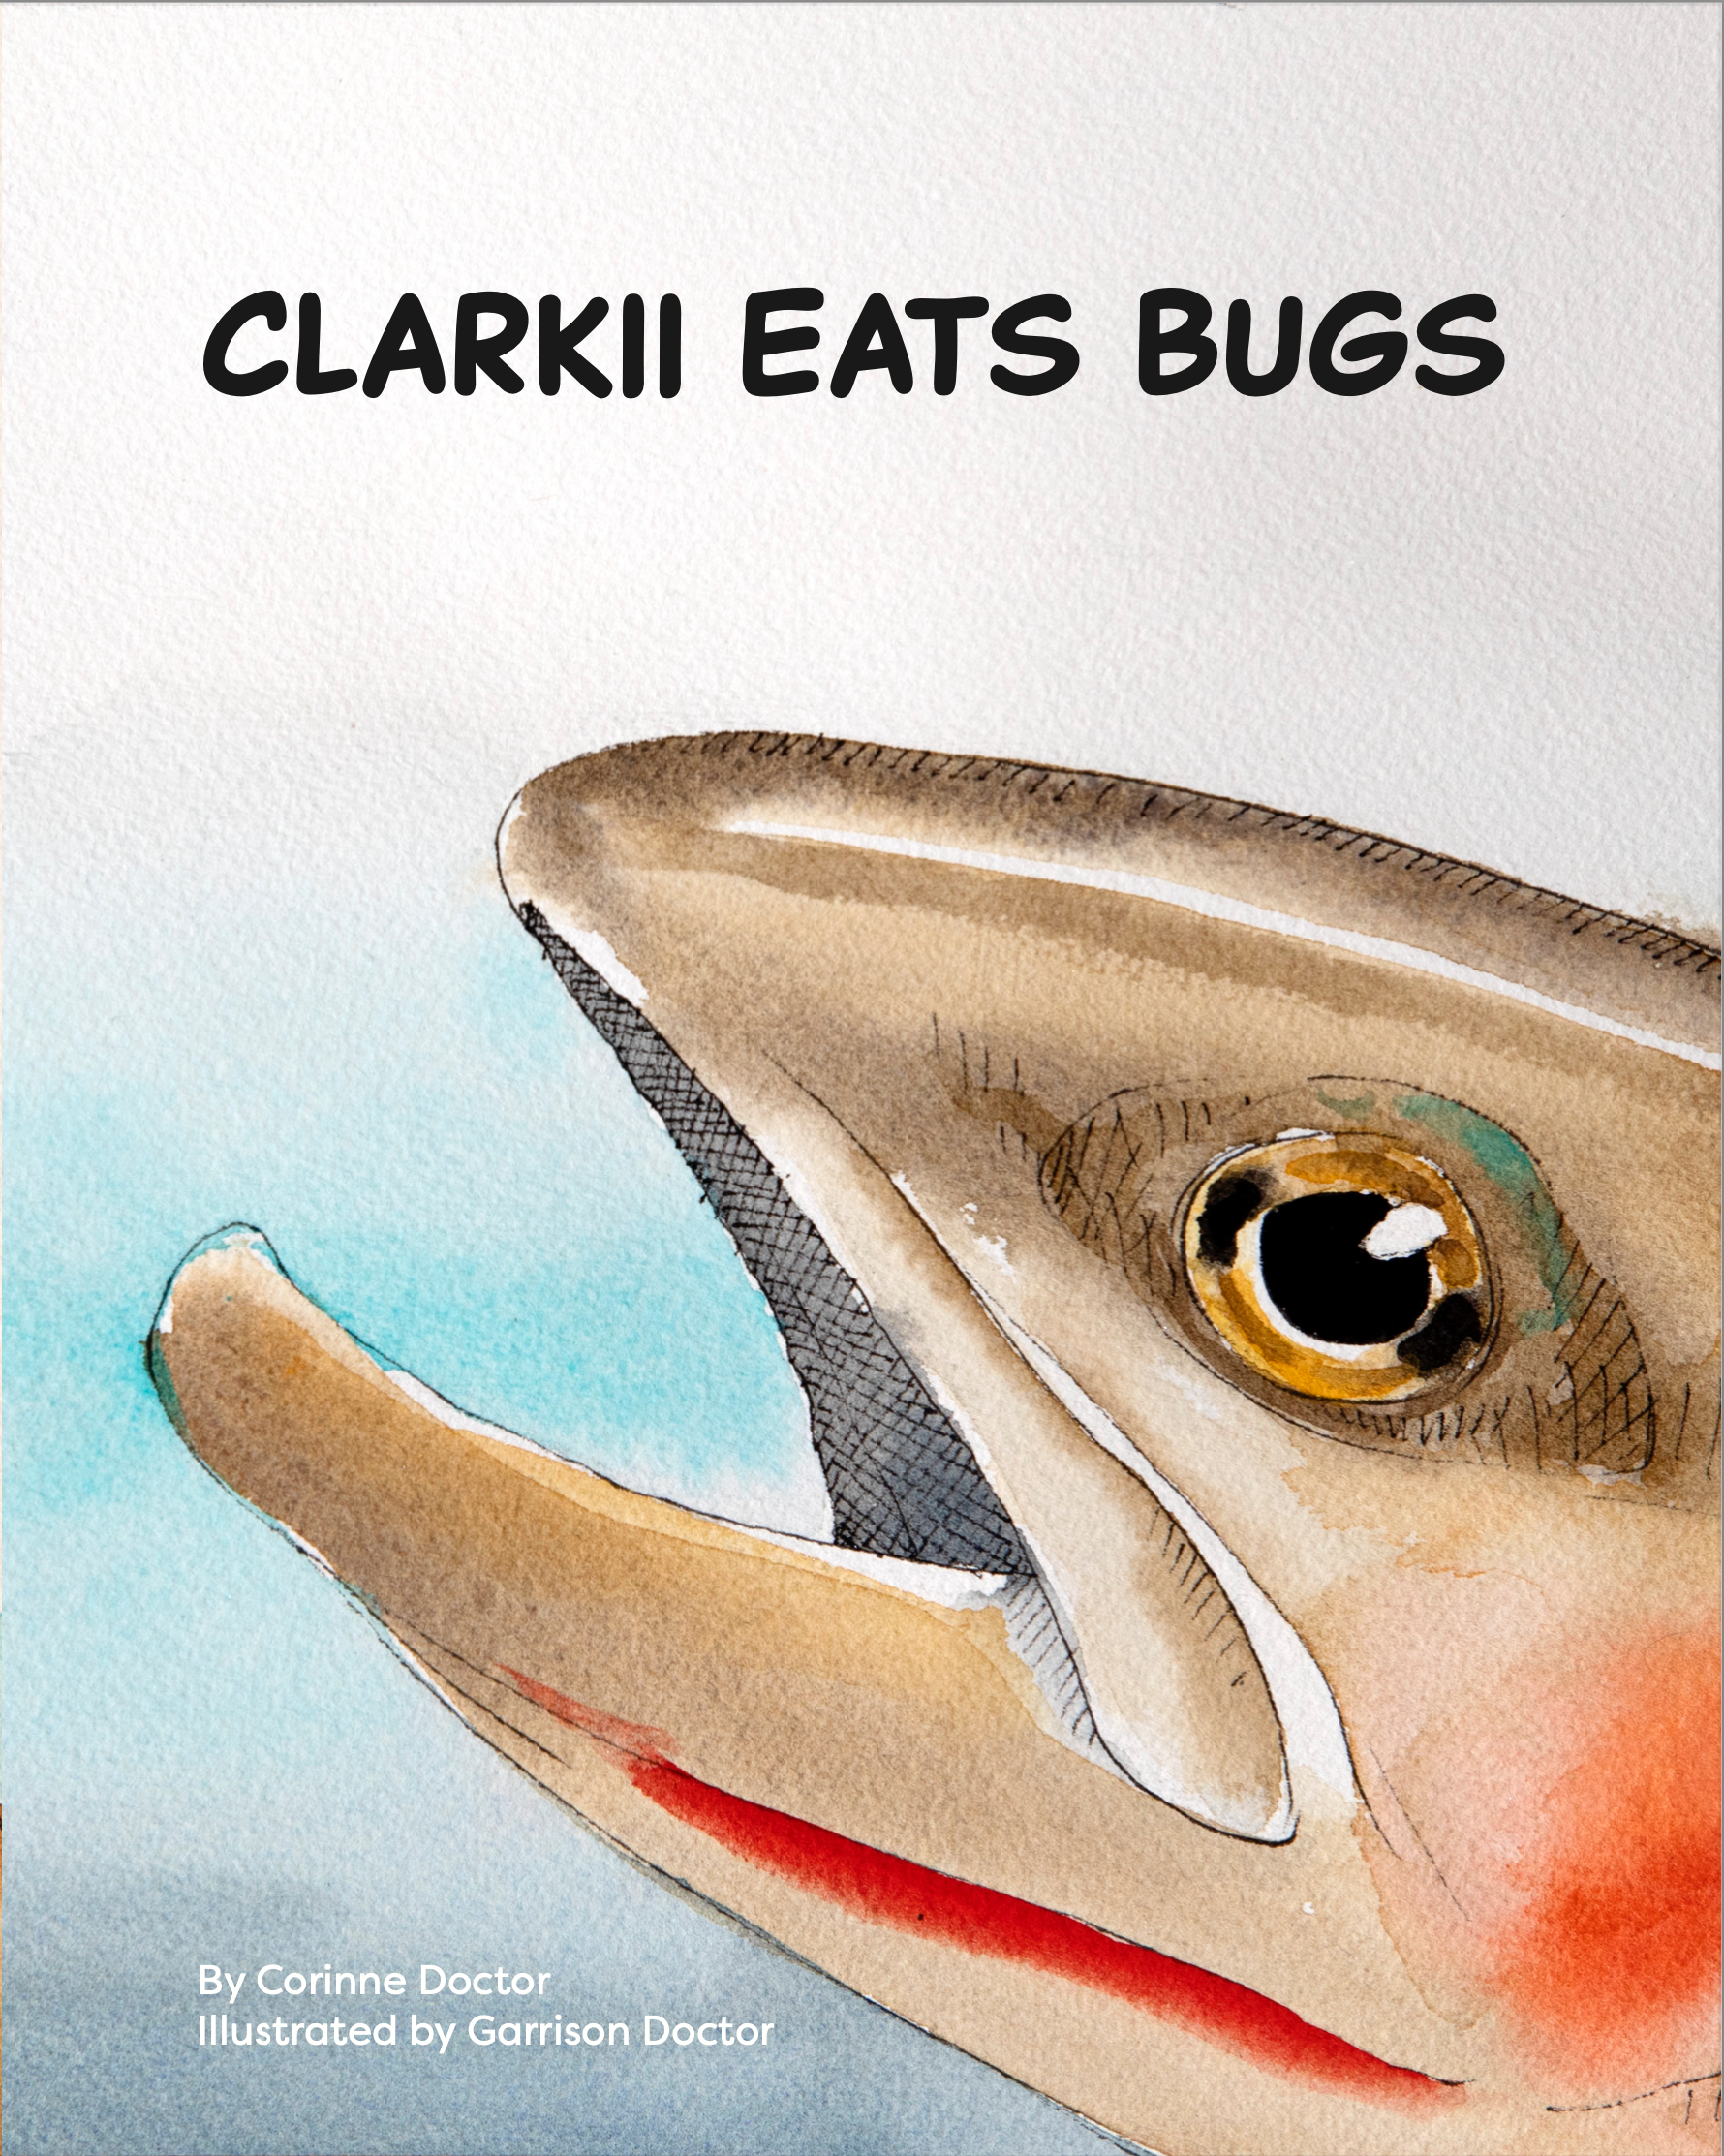 Front cover shows a trout face and reads title clarkii eats bugs by corinne doctor illustrated by garrison doctor